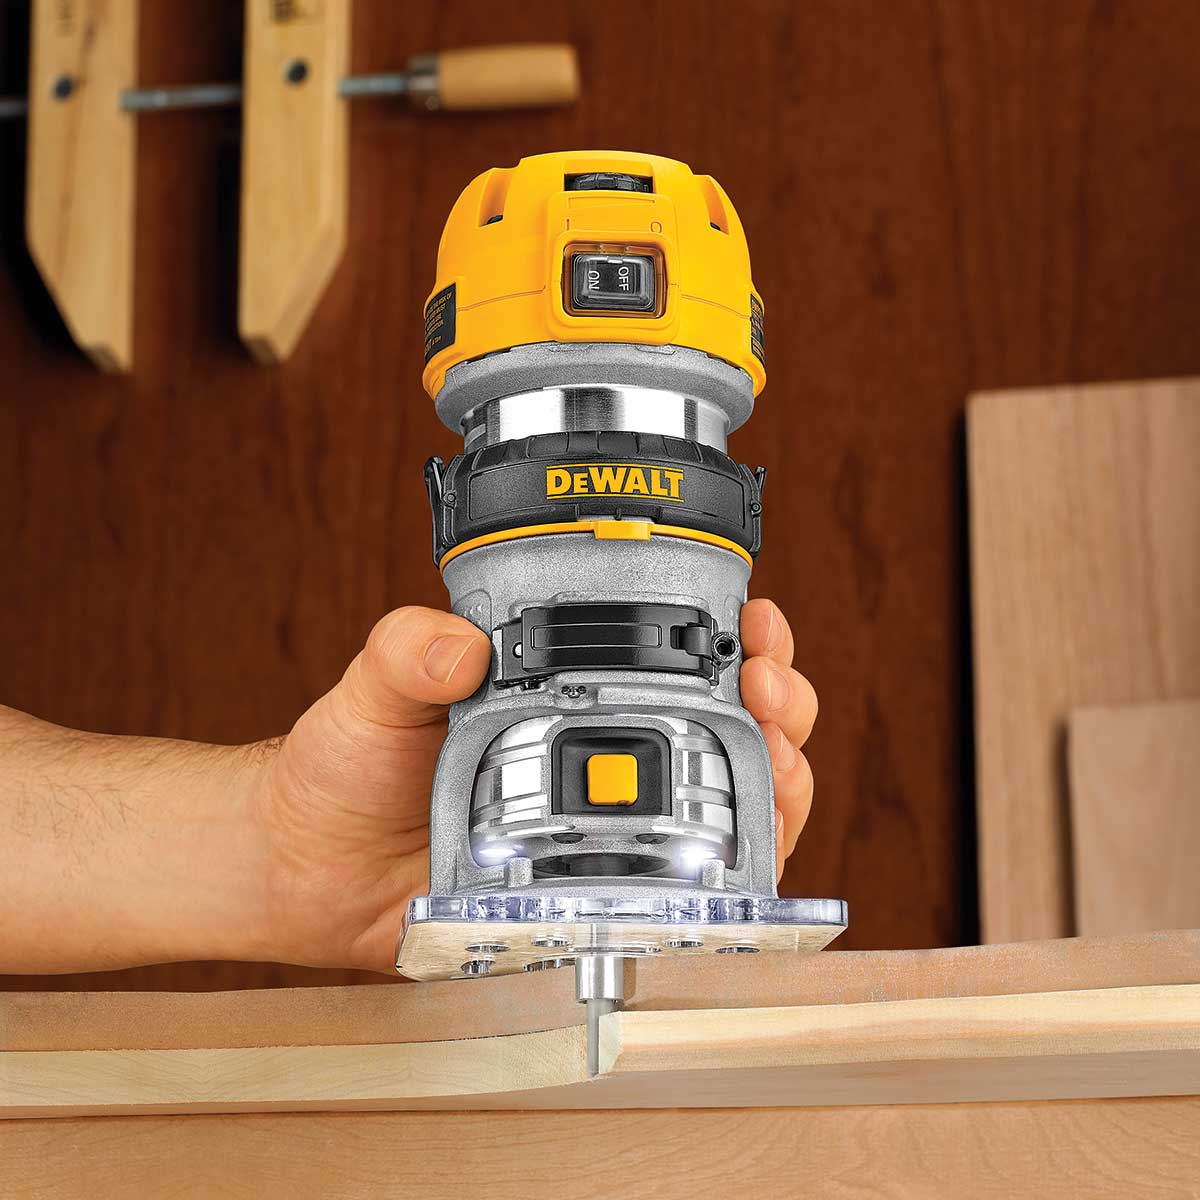 DEWALT 1.25 HP MAX Torque Variable Speed Compact Router with LED's